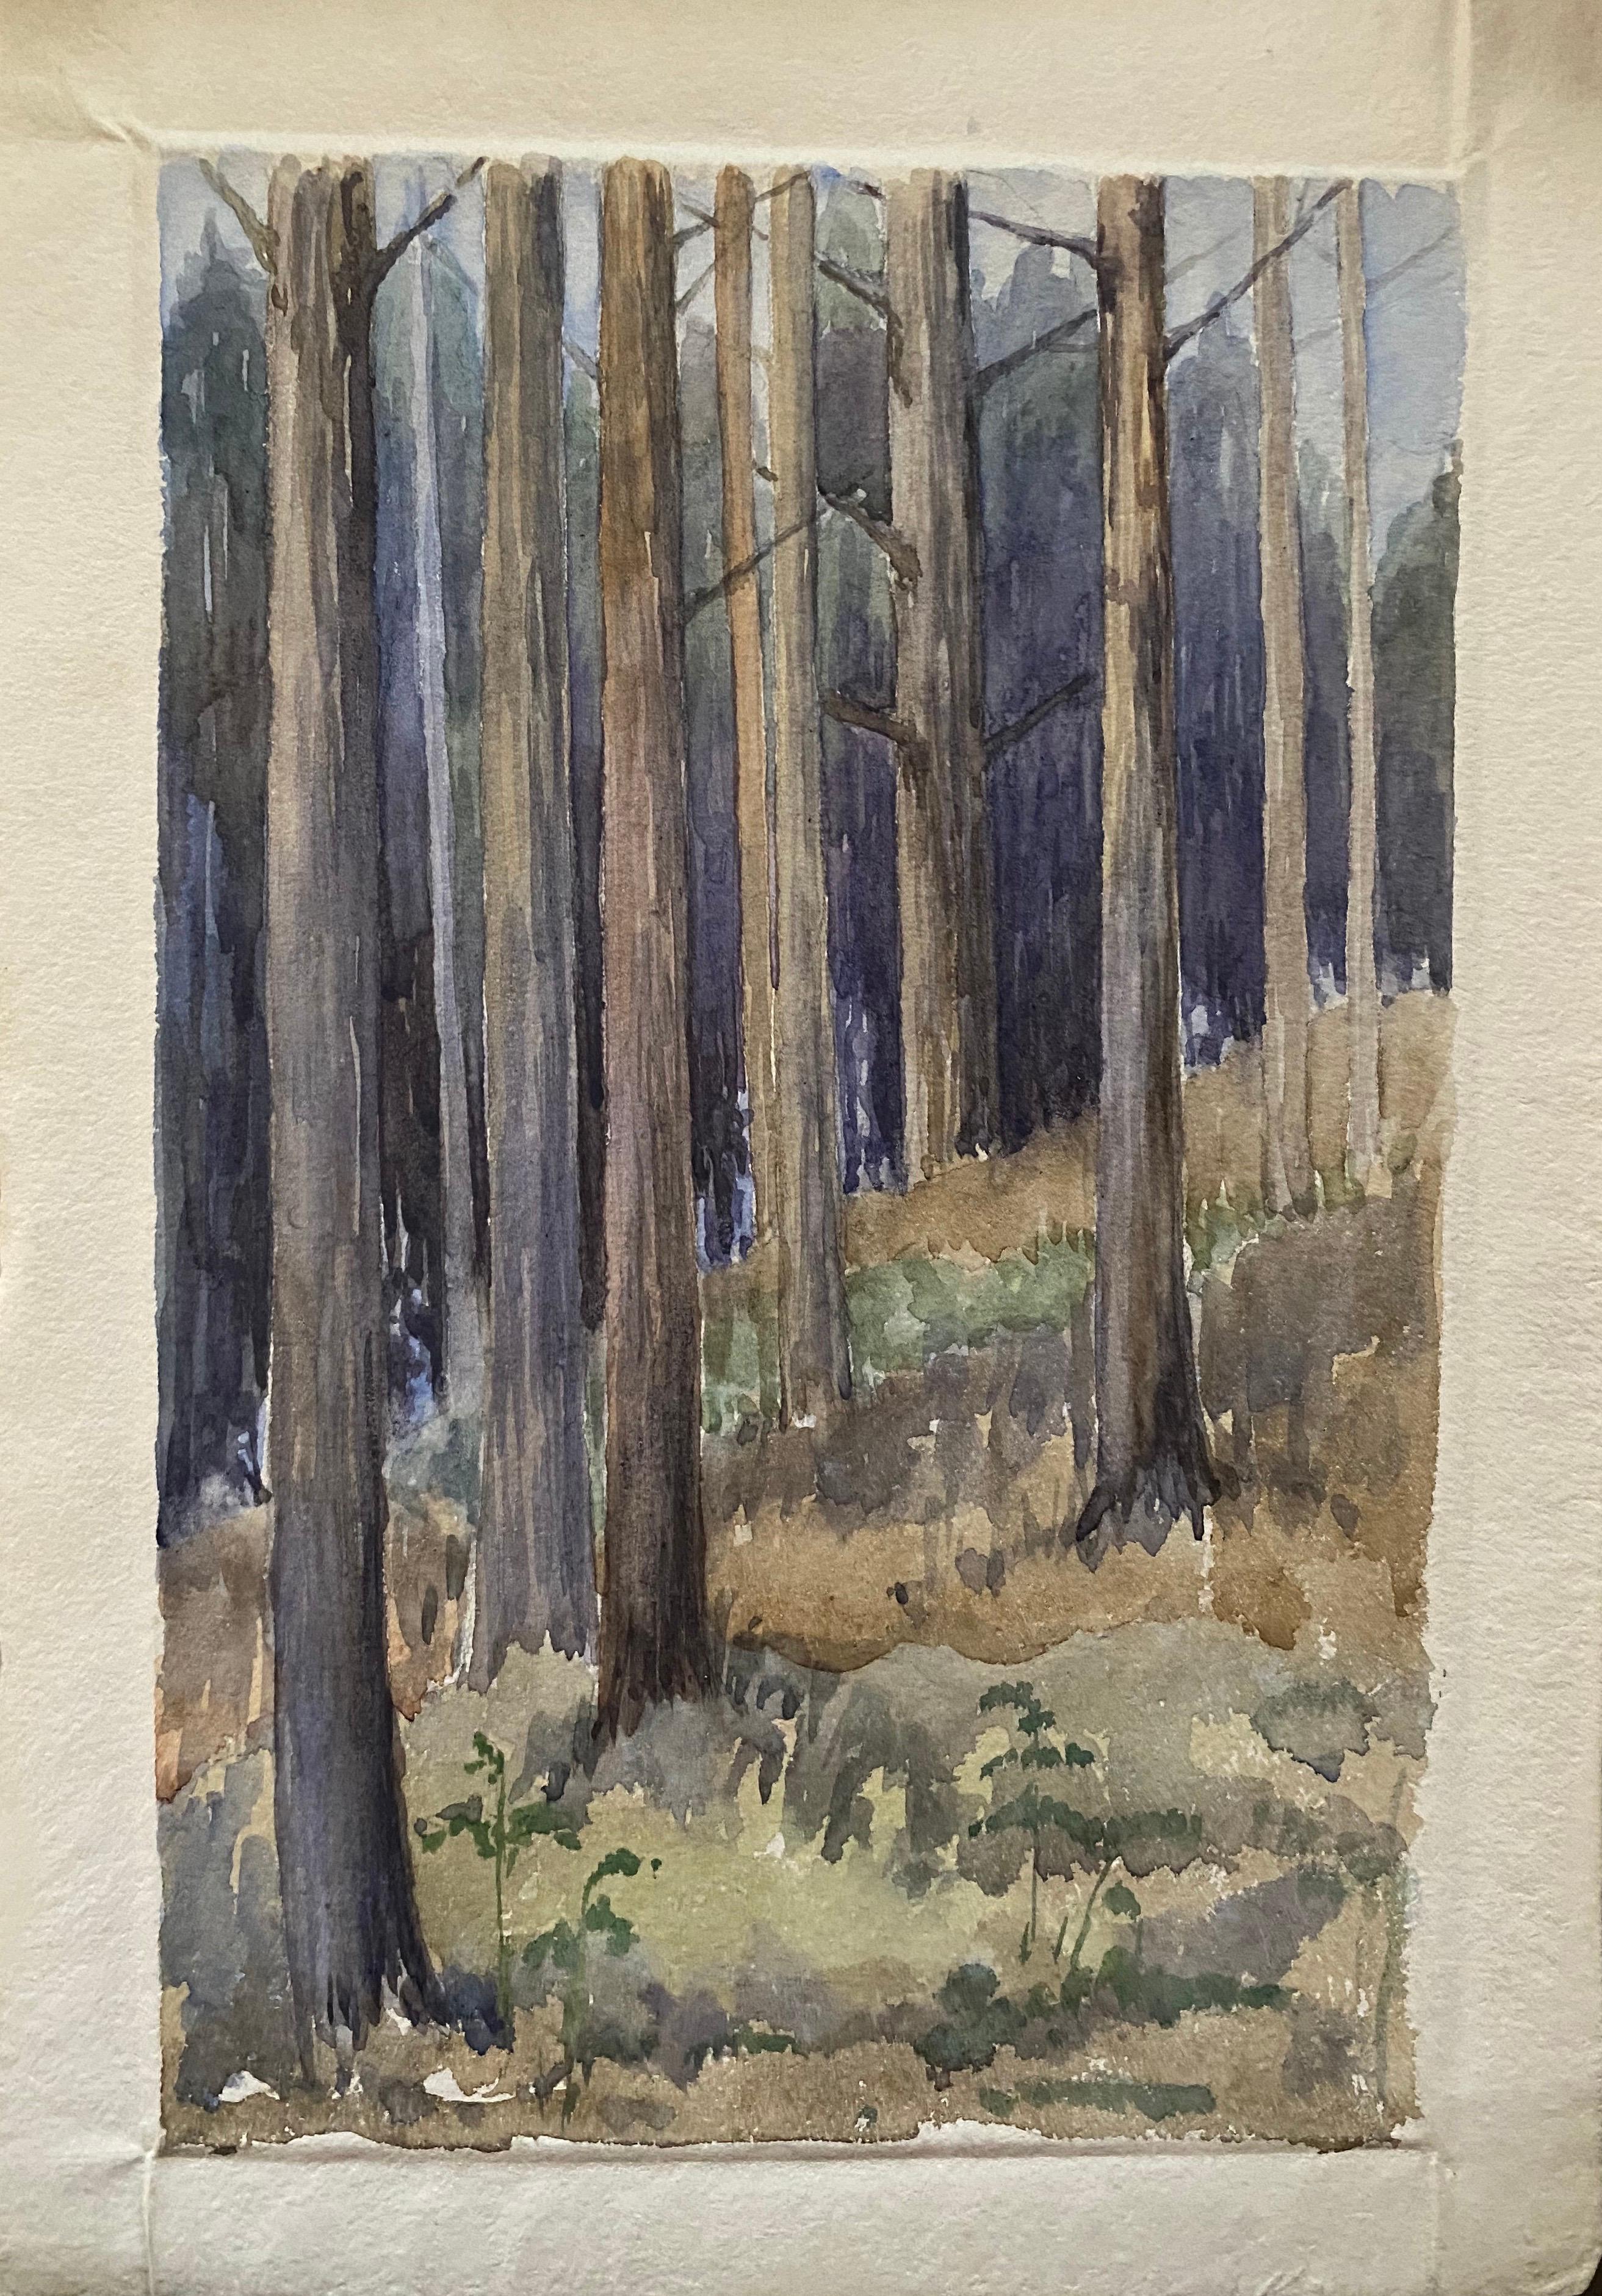 Midnight Forest
English School, early 1900's
Original watercolor painting on artists paper, unframed
Overall paper size: 11 x 7.5 inches


From a large private collection of English watercolor paintings, all by the same hand, we offer this